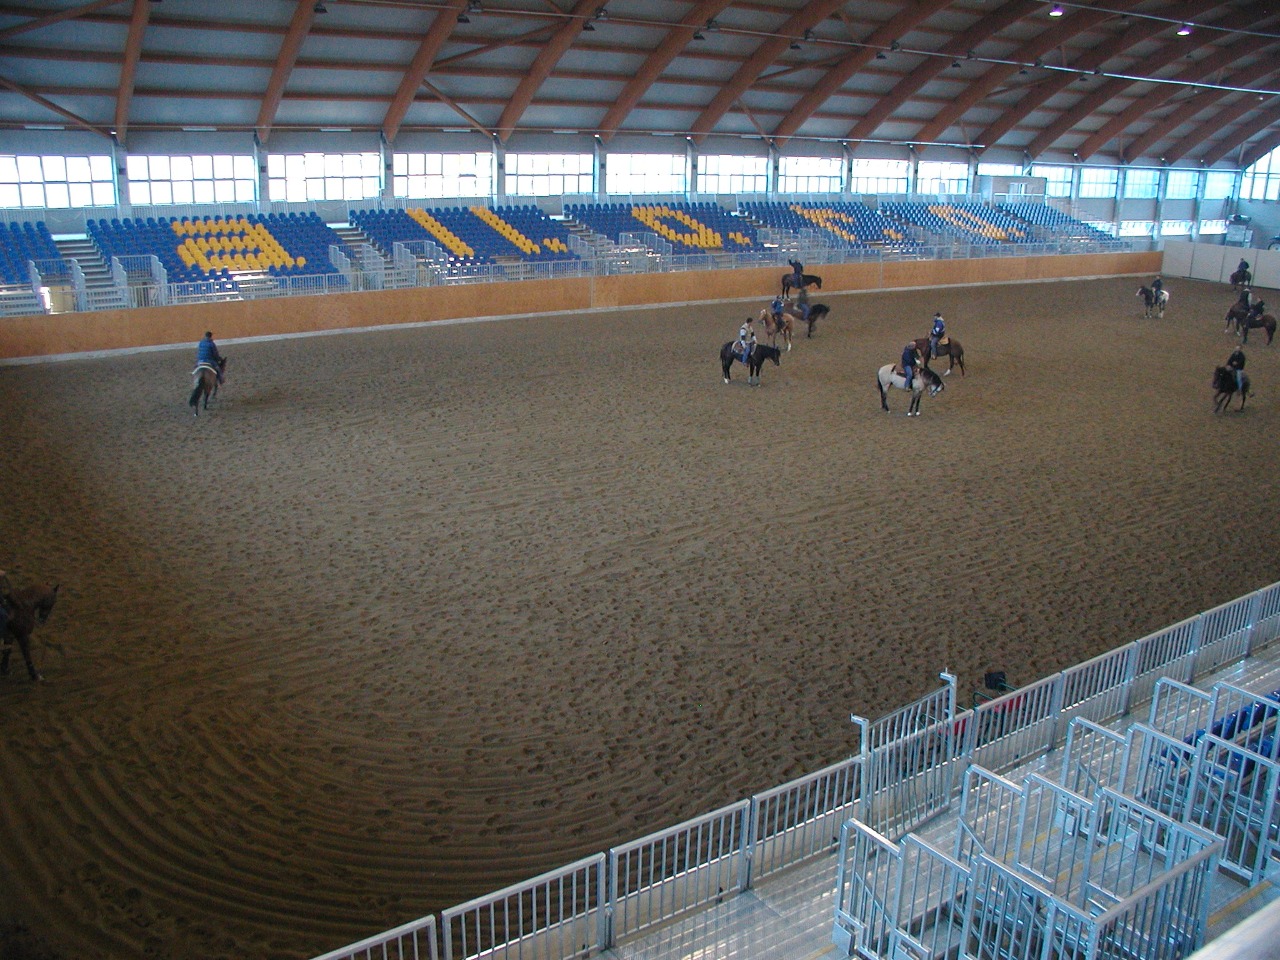 Gallery foto n.2 Prefabricated stands M12/1 - Horse Riding Center 